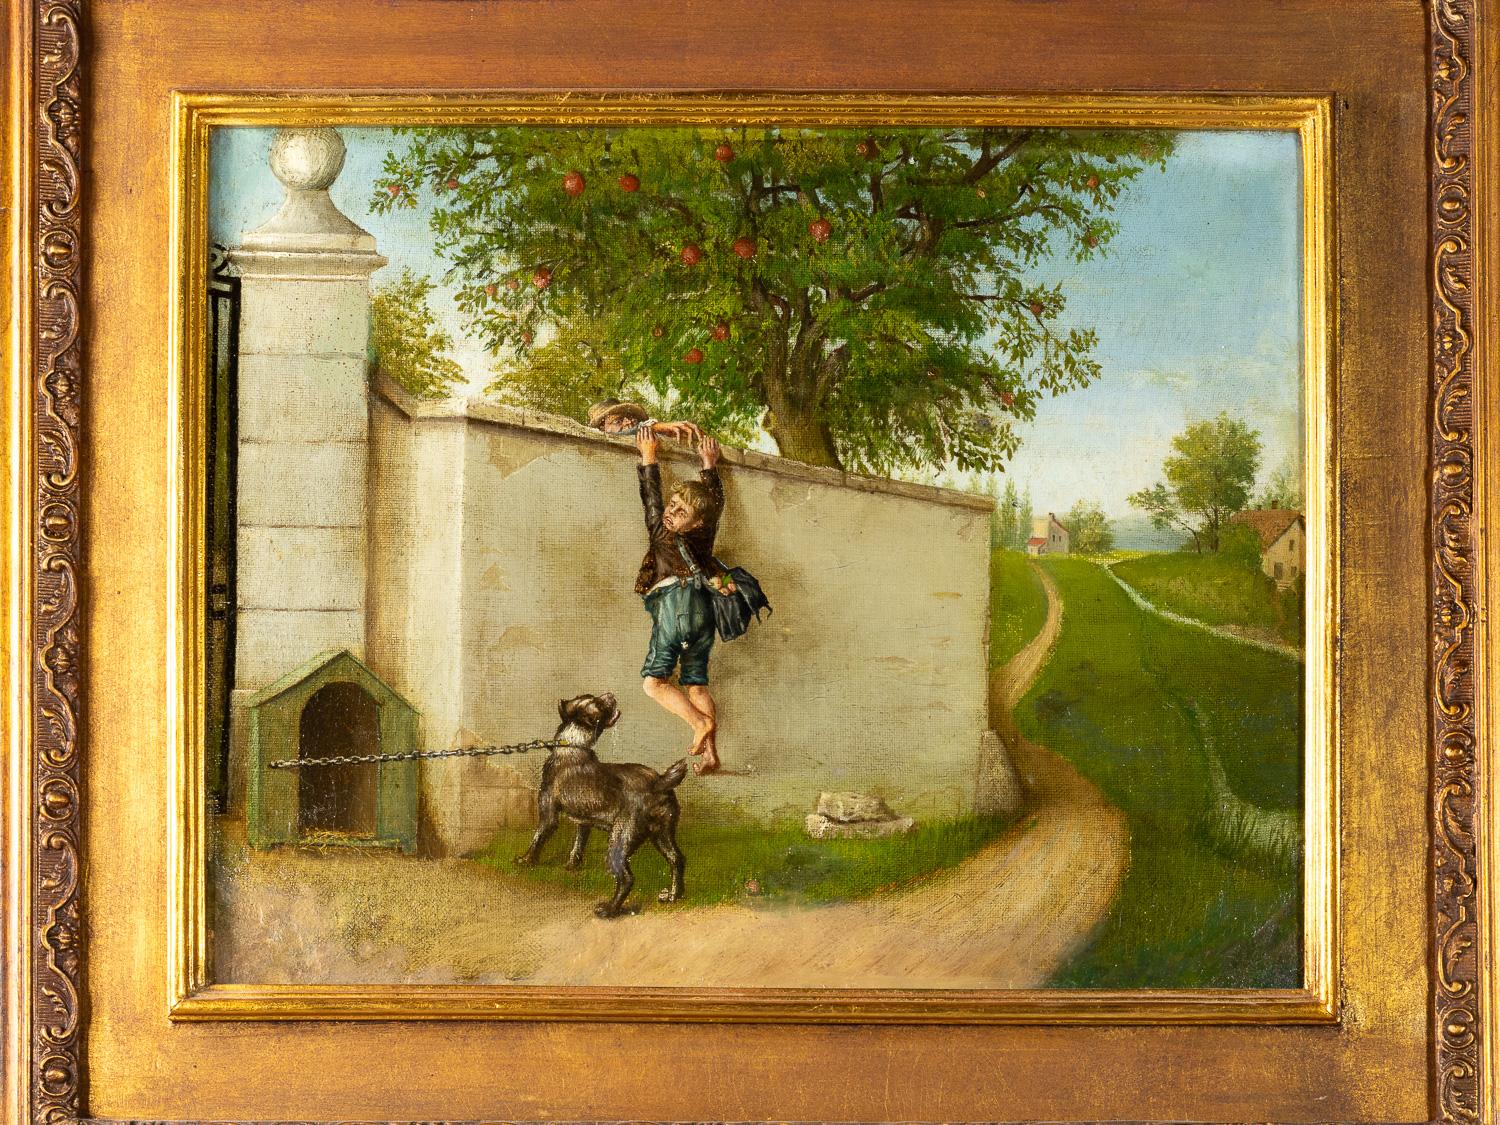 Wood 19th Century French Oil Painting Of Young Boy, Romanticism Period Work Of Art For Sale